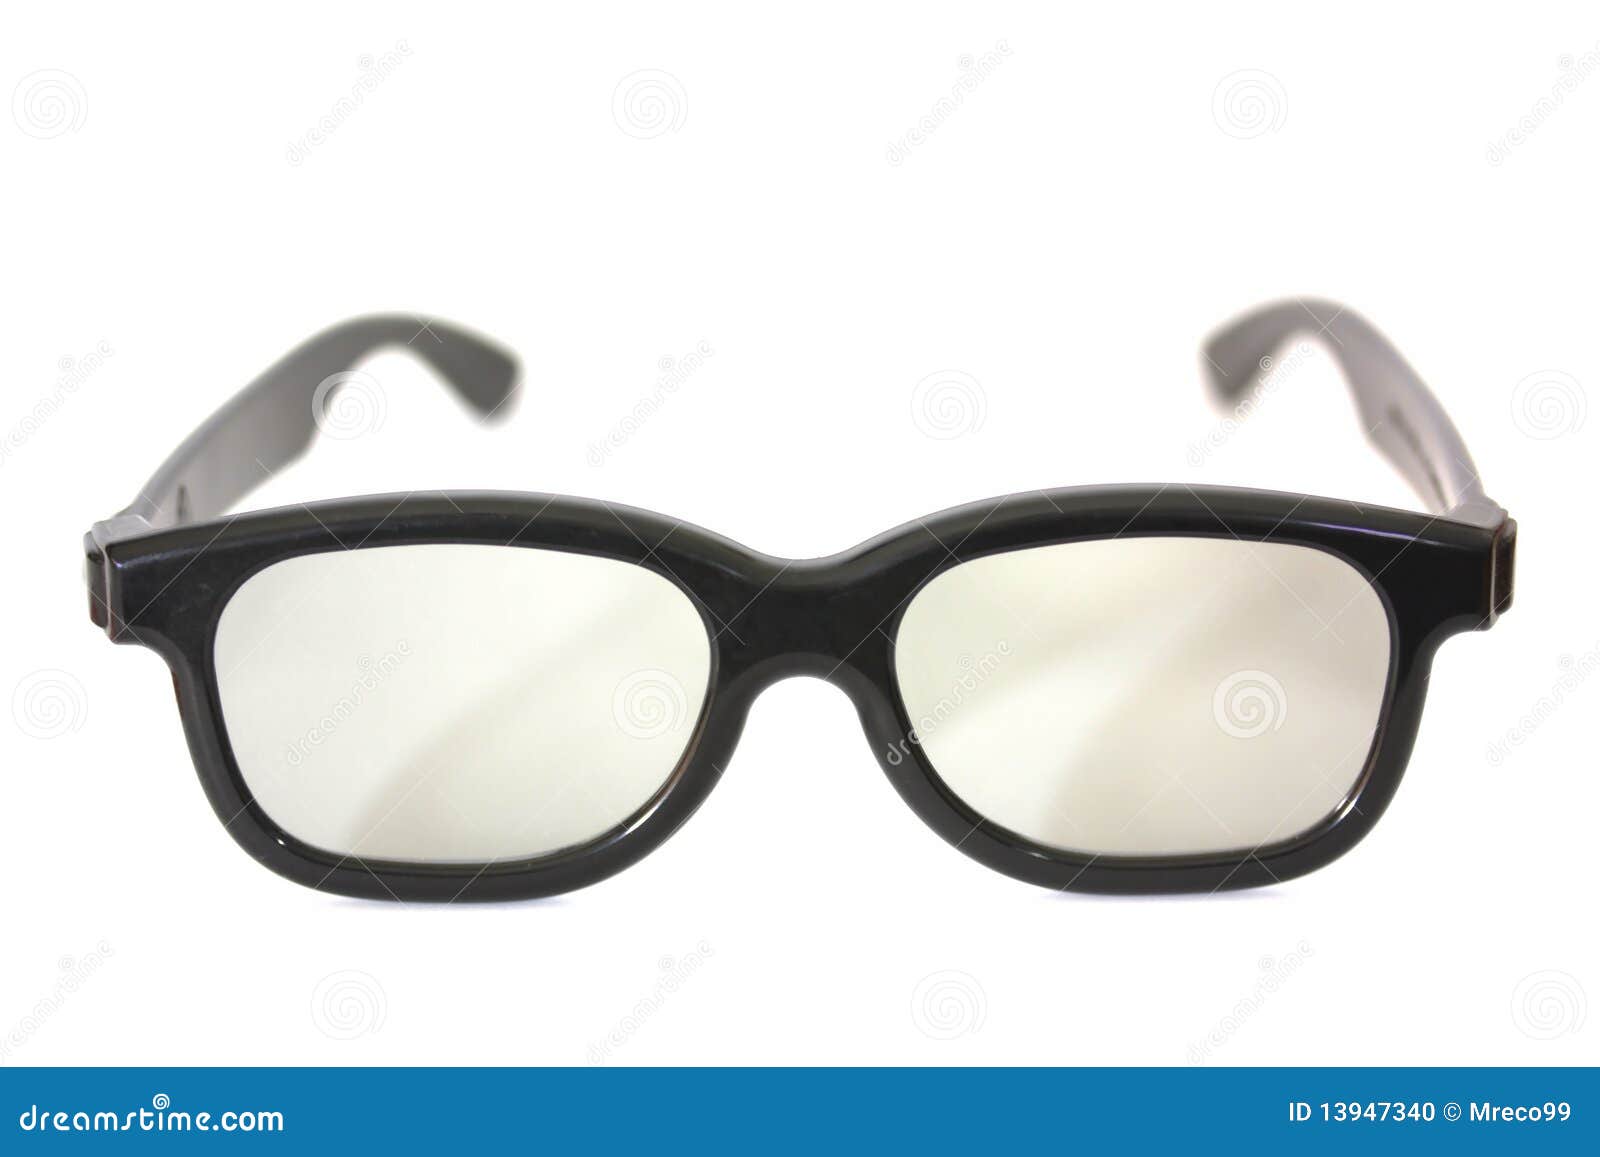 Black Rimmed Glasses Isolated Stock Photo - Image of specs, clear: 13947340